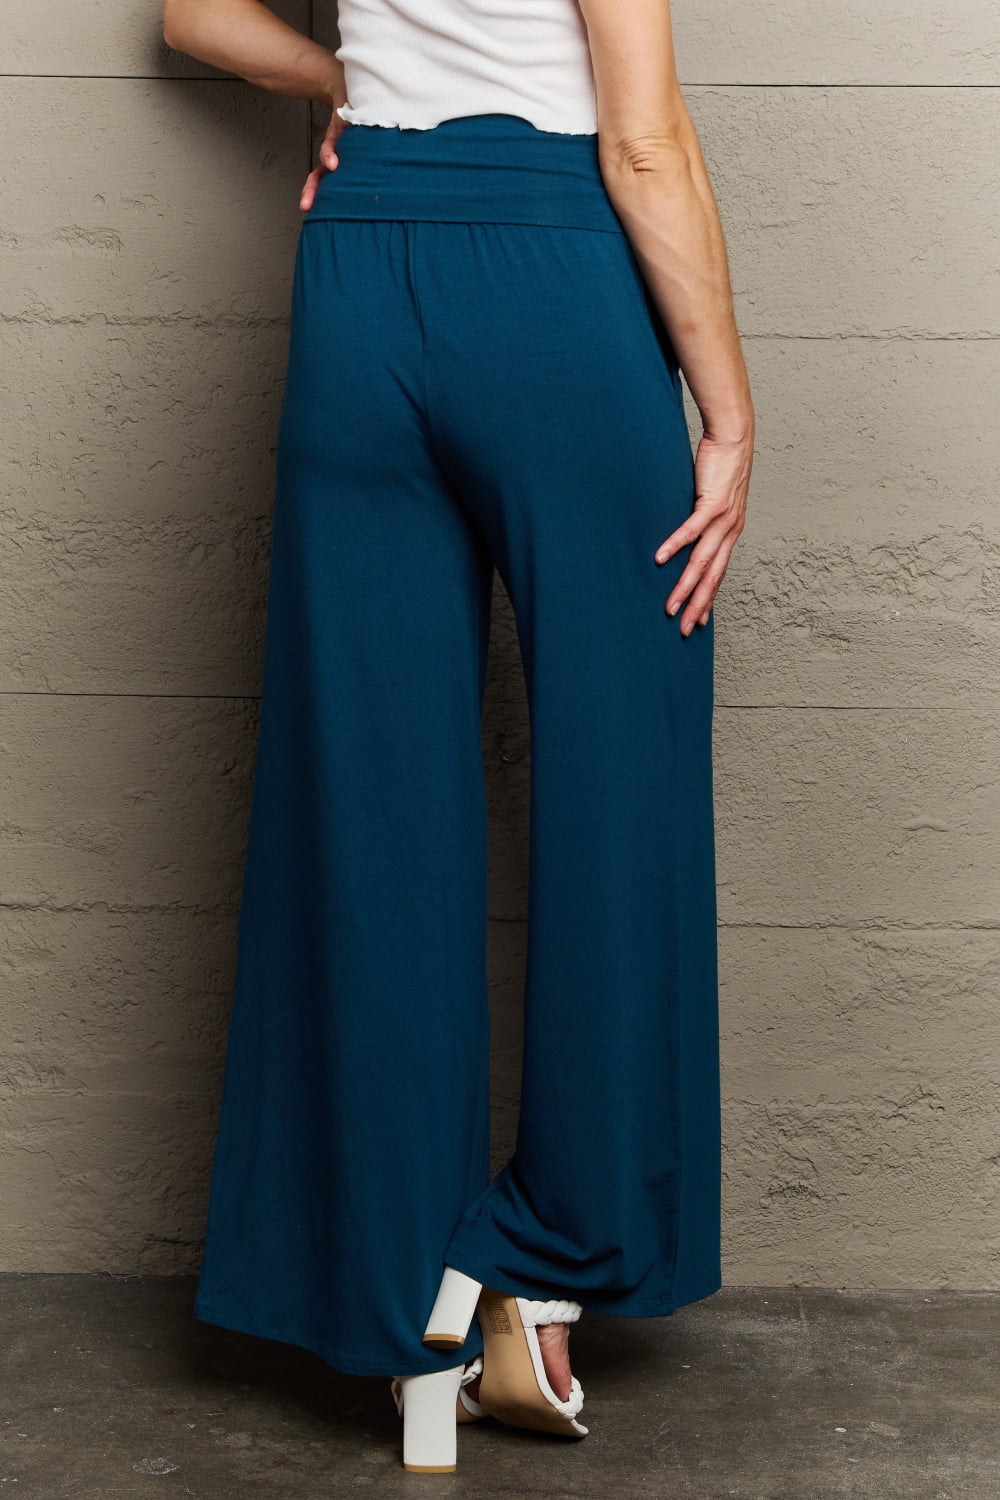 Culture Code My Best Wish Full Size High Waisted Palazzo Pants Bottom wear